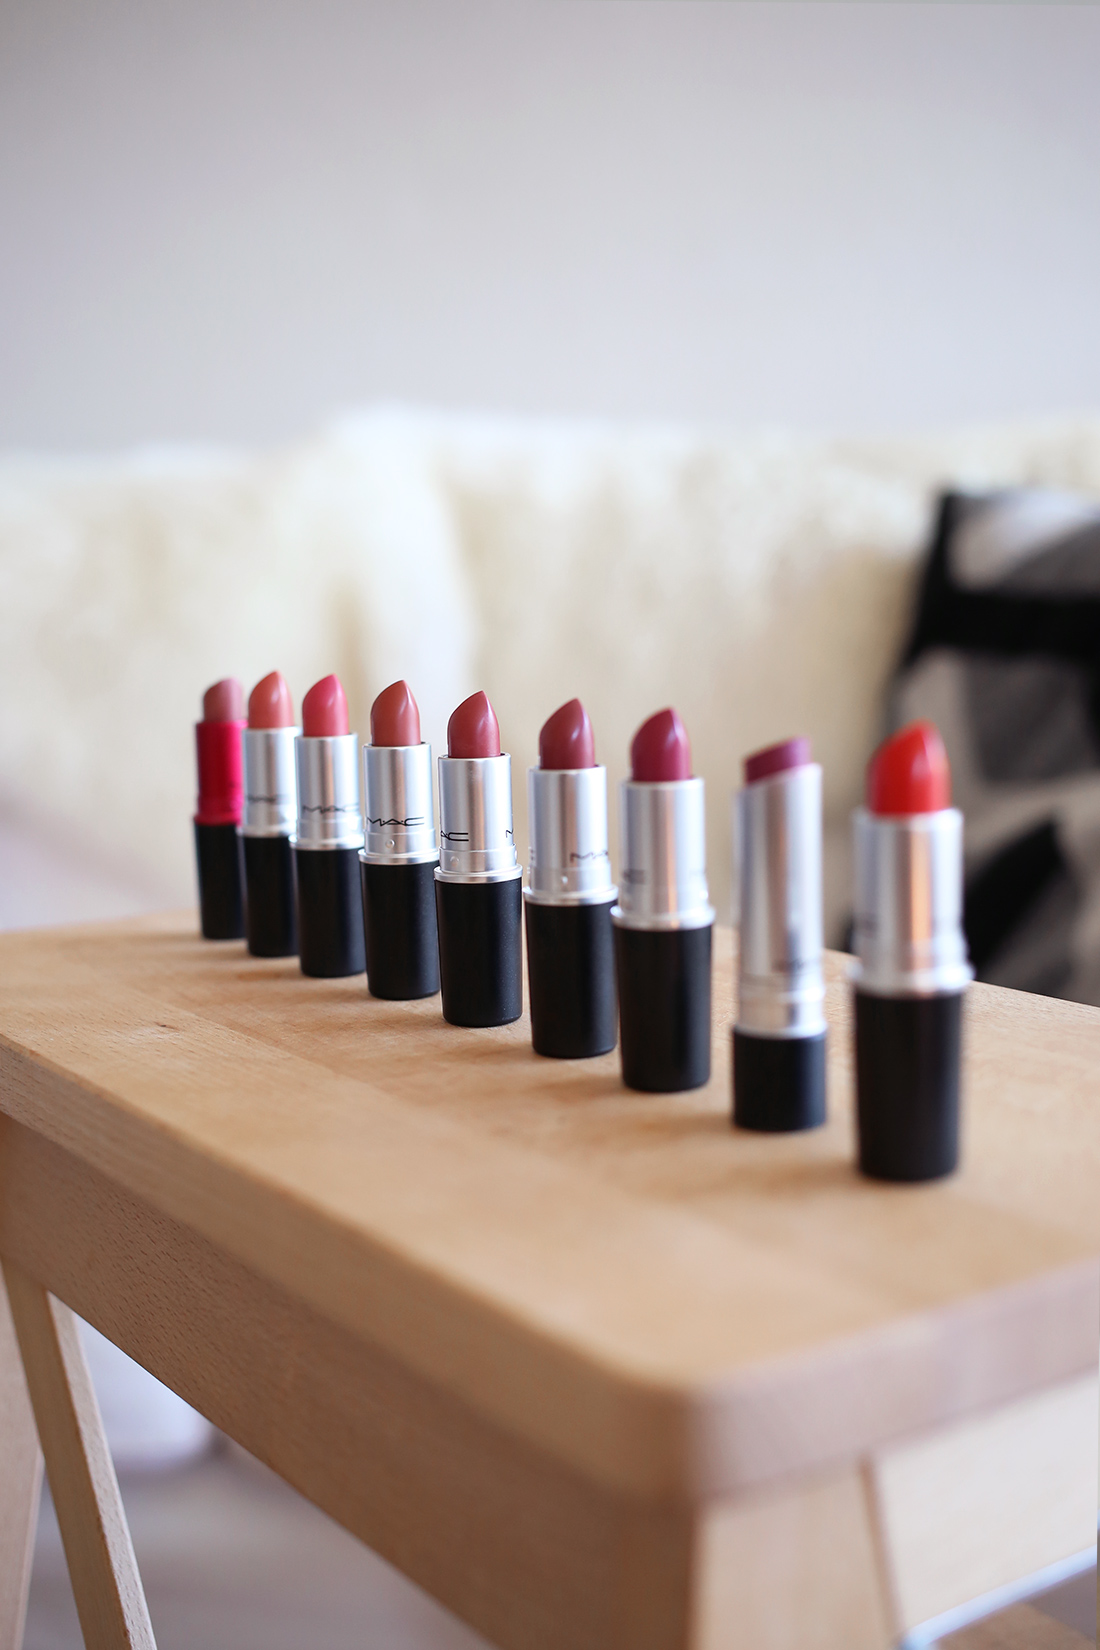 mac lipstick collection swatches